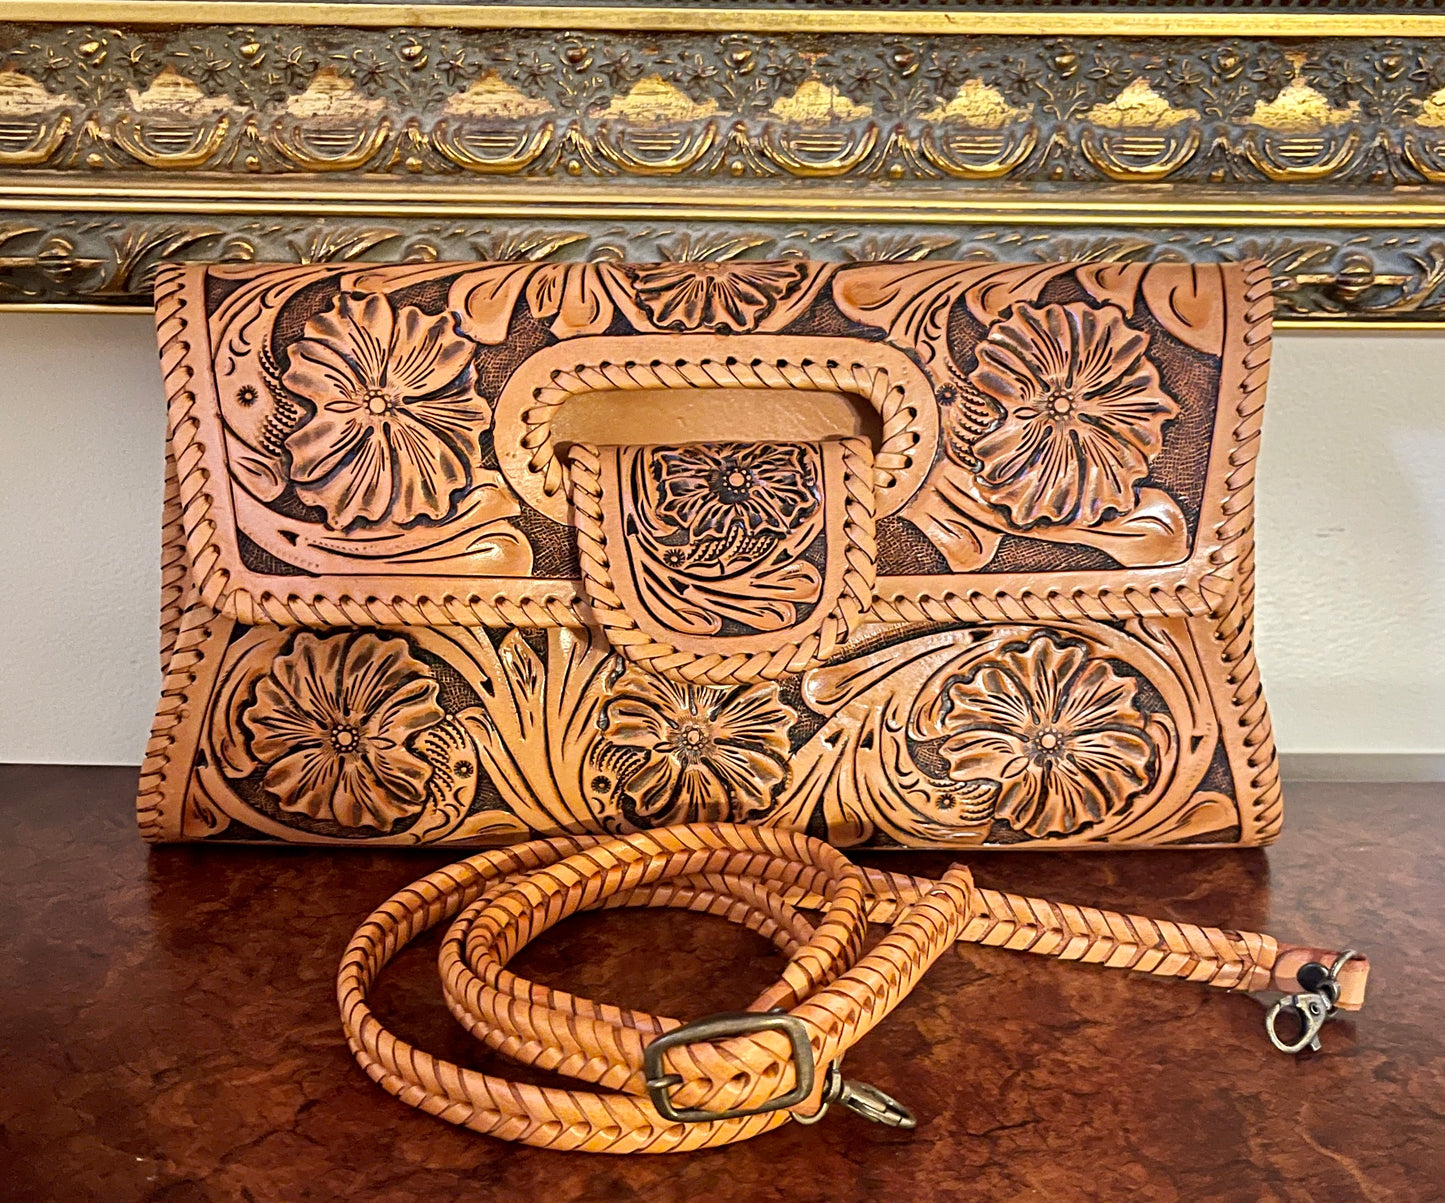 Hand-Tooled Leather Small Clutch & Crossbody "LENGUETA" by ALLE, more colors